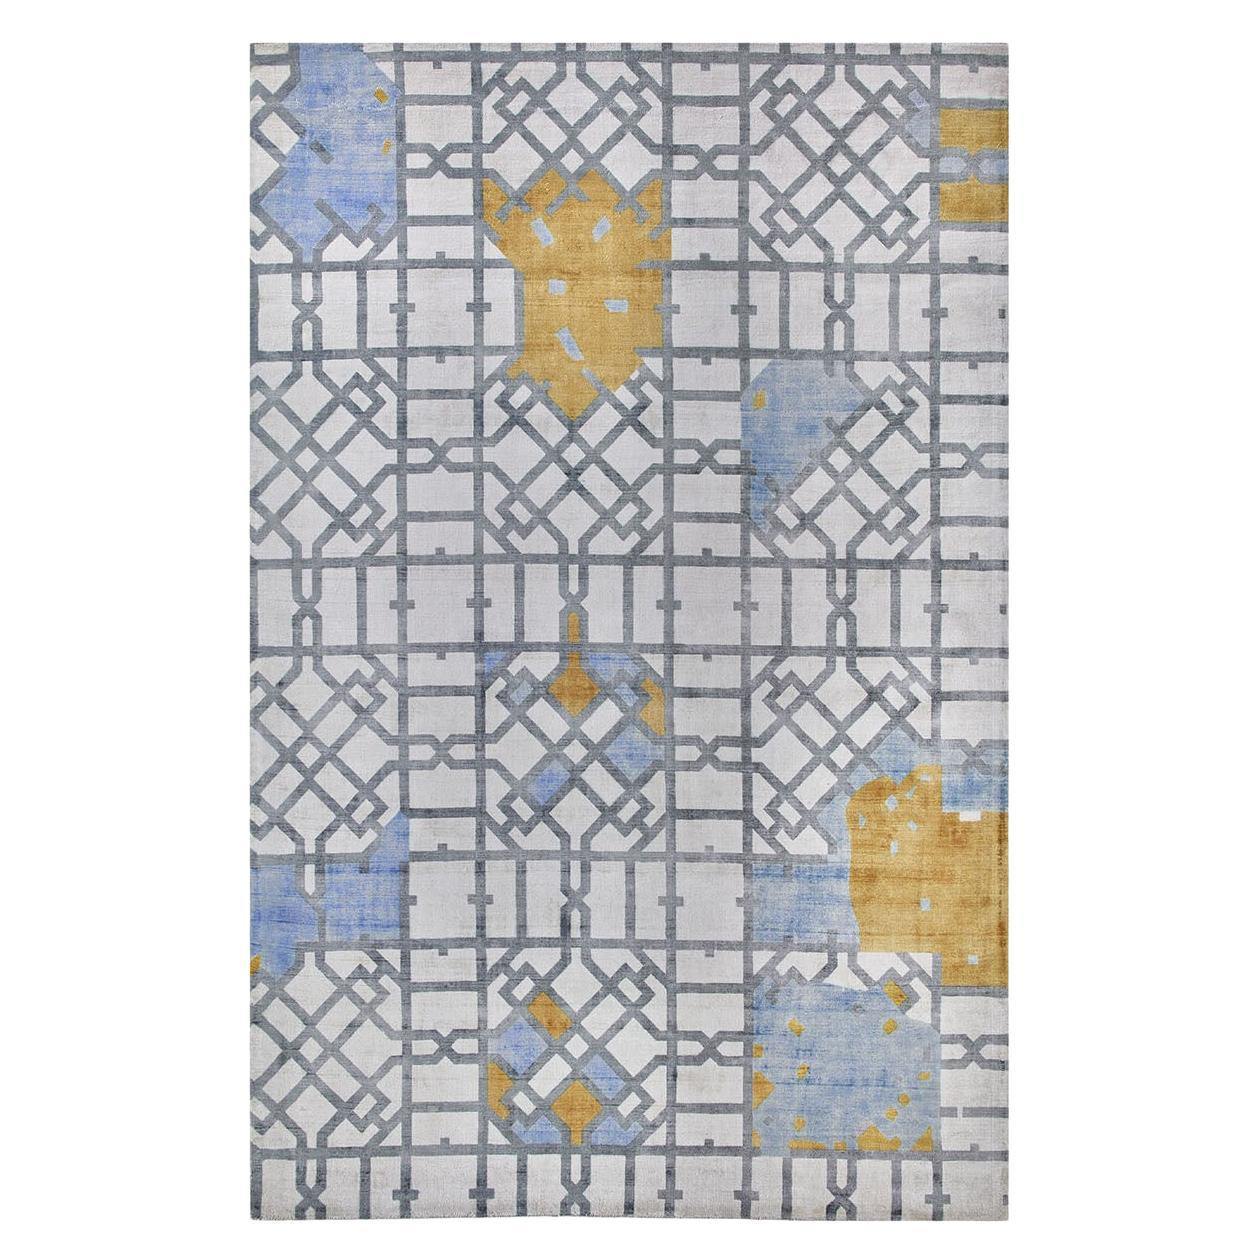 Citylife Square Rug by Barbara Trombatore For Sale